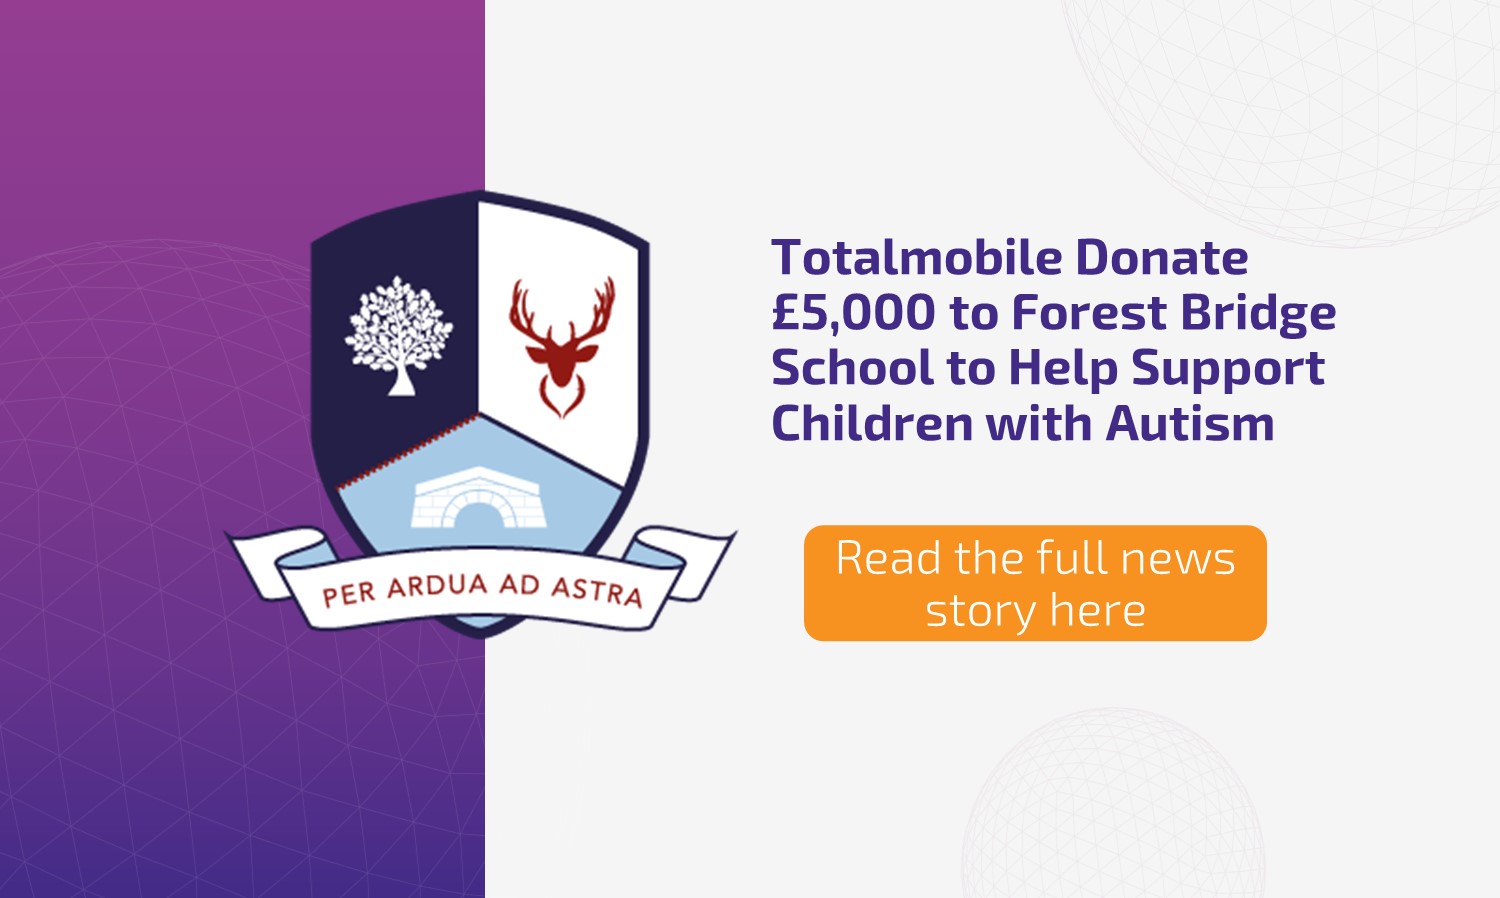 Totalmobile Donate £5,000 to Forest Bridge School to Help Support Children with Autism